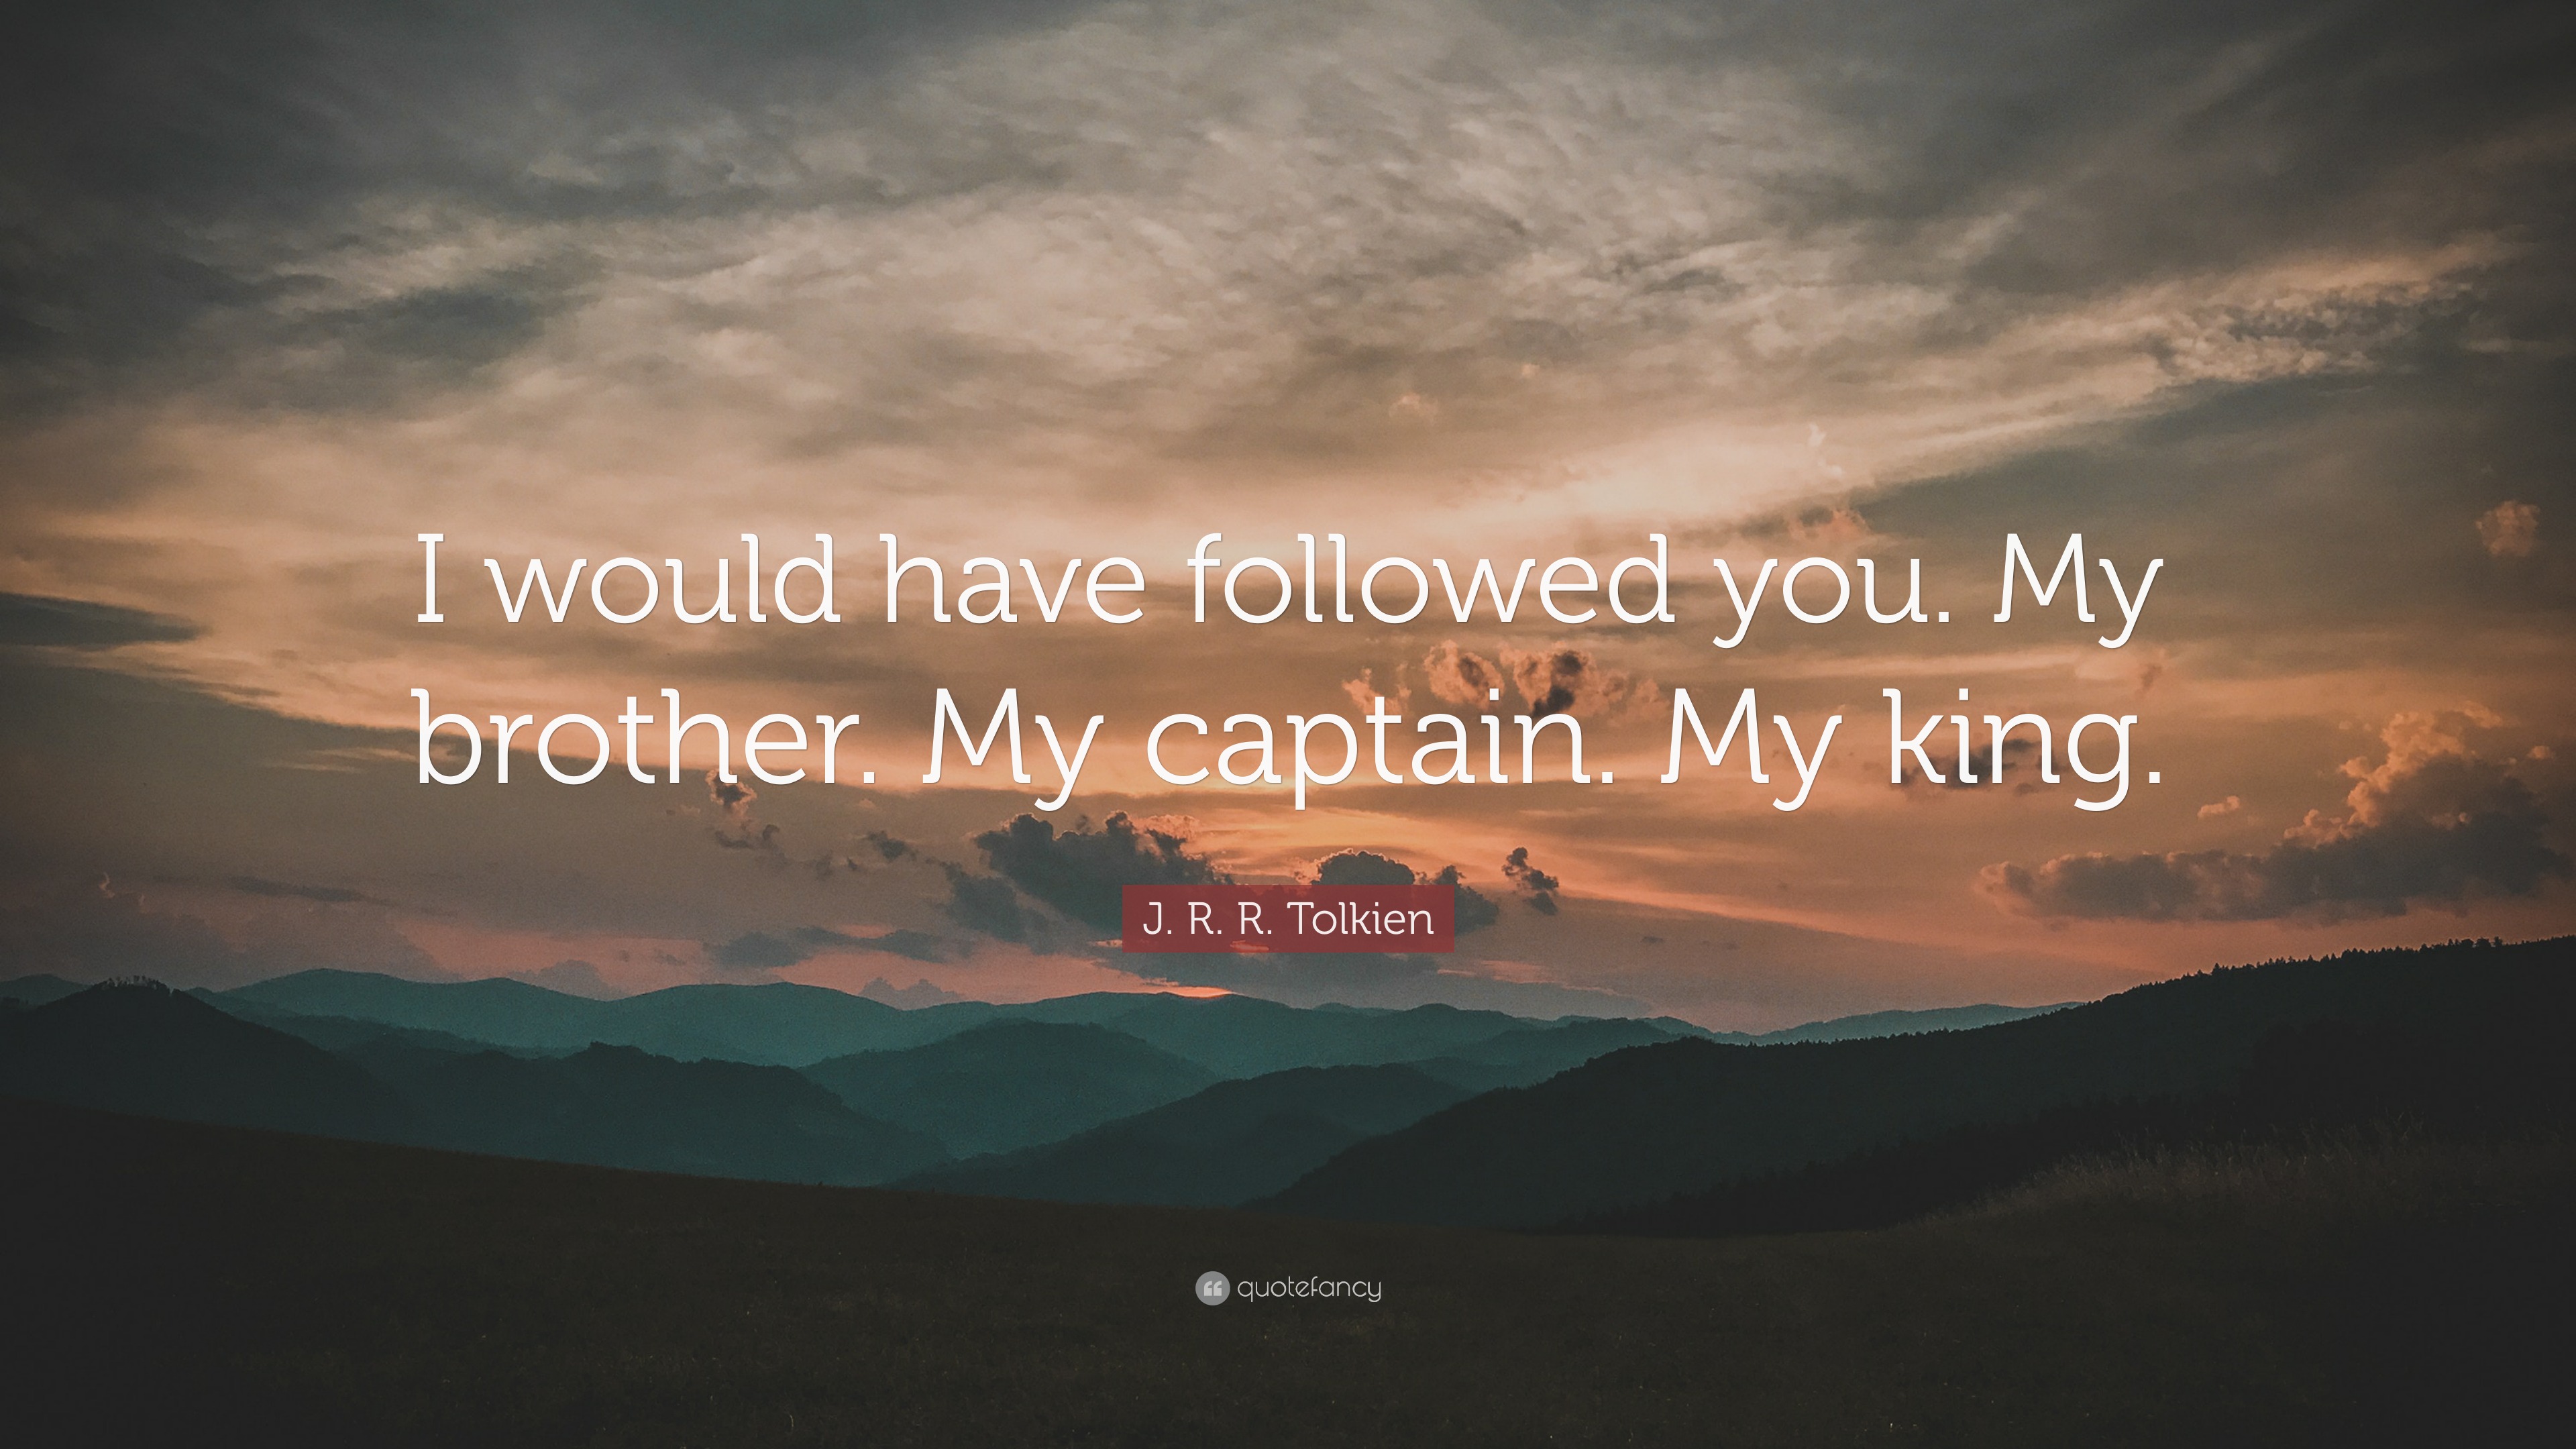 J R R Tolkien Quote “i Would Have Followed You My Brother My